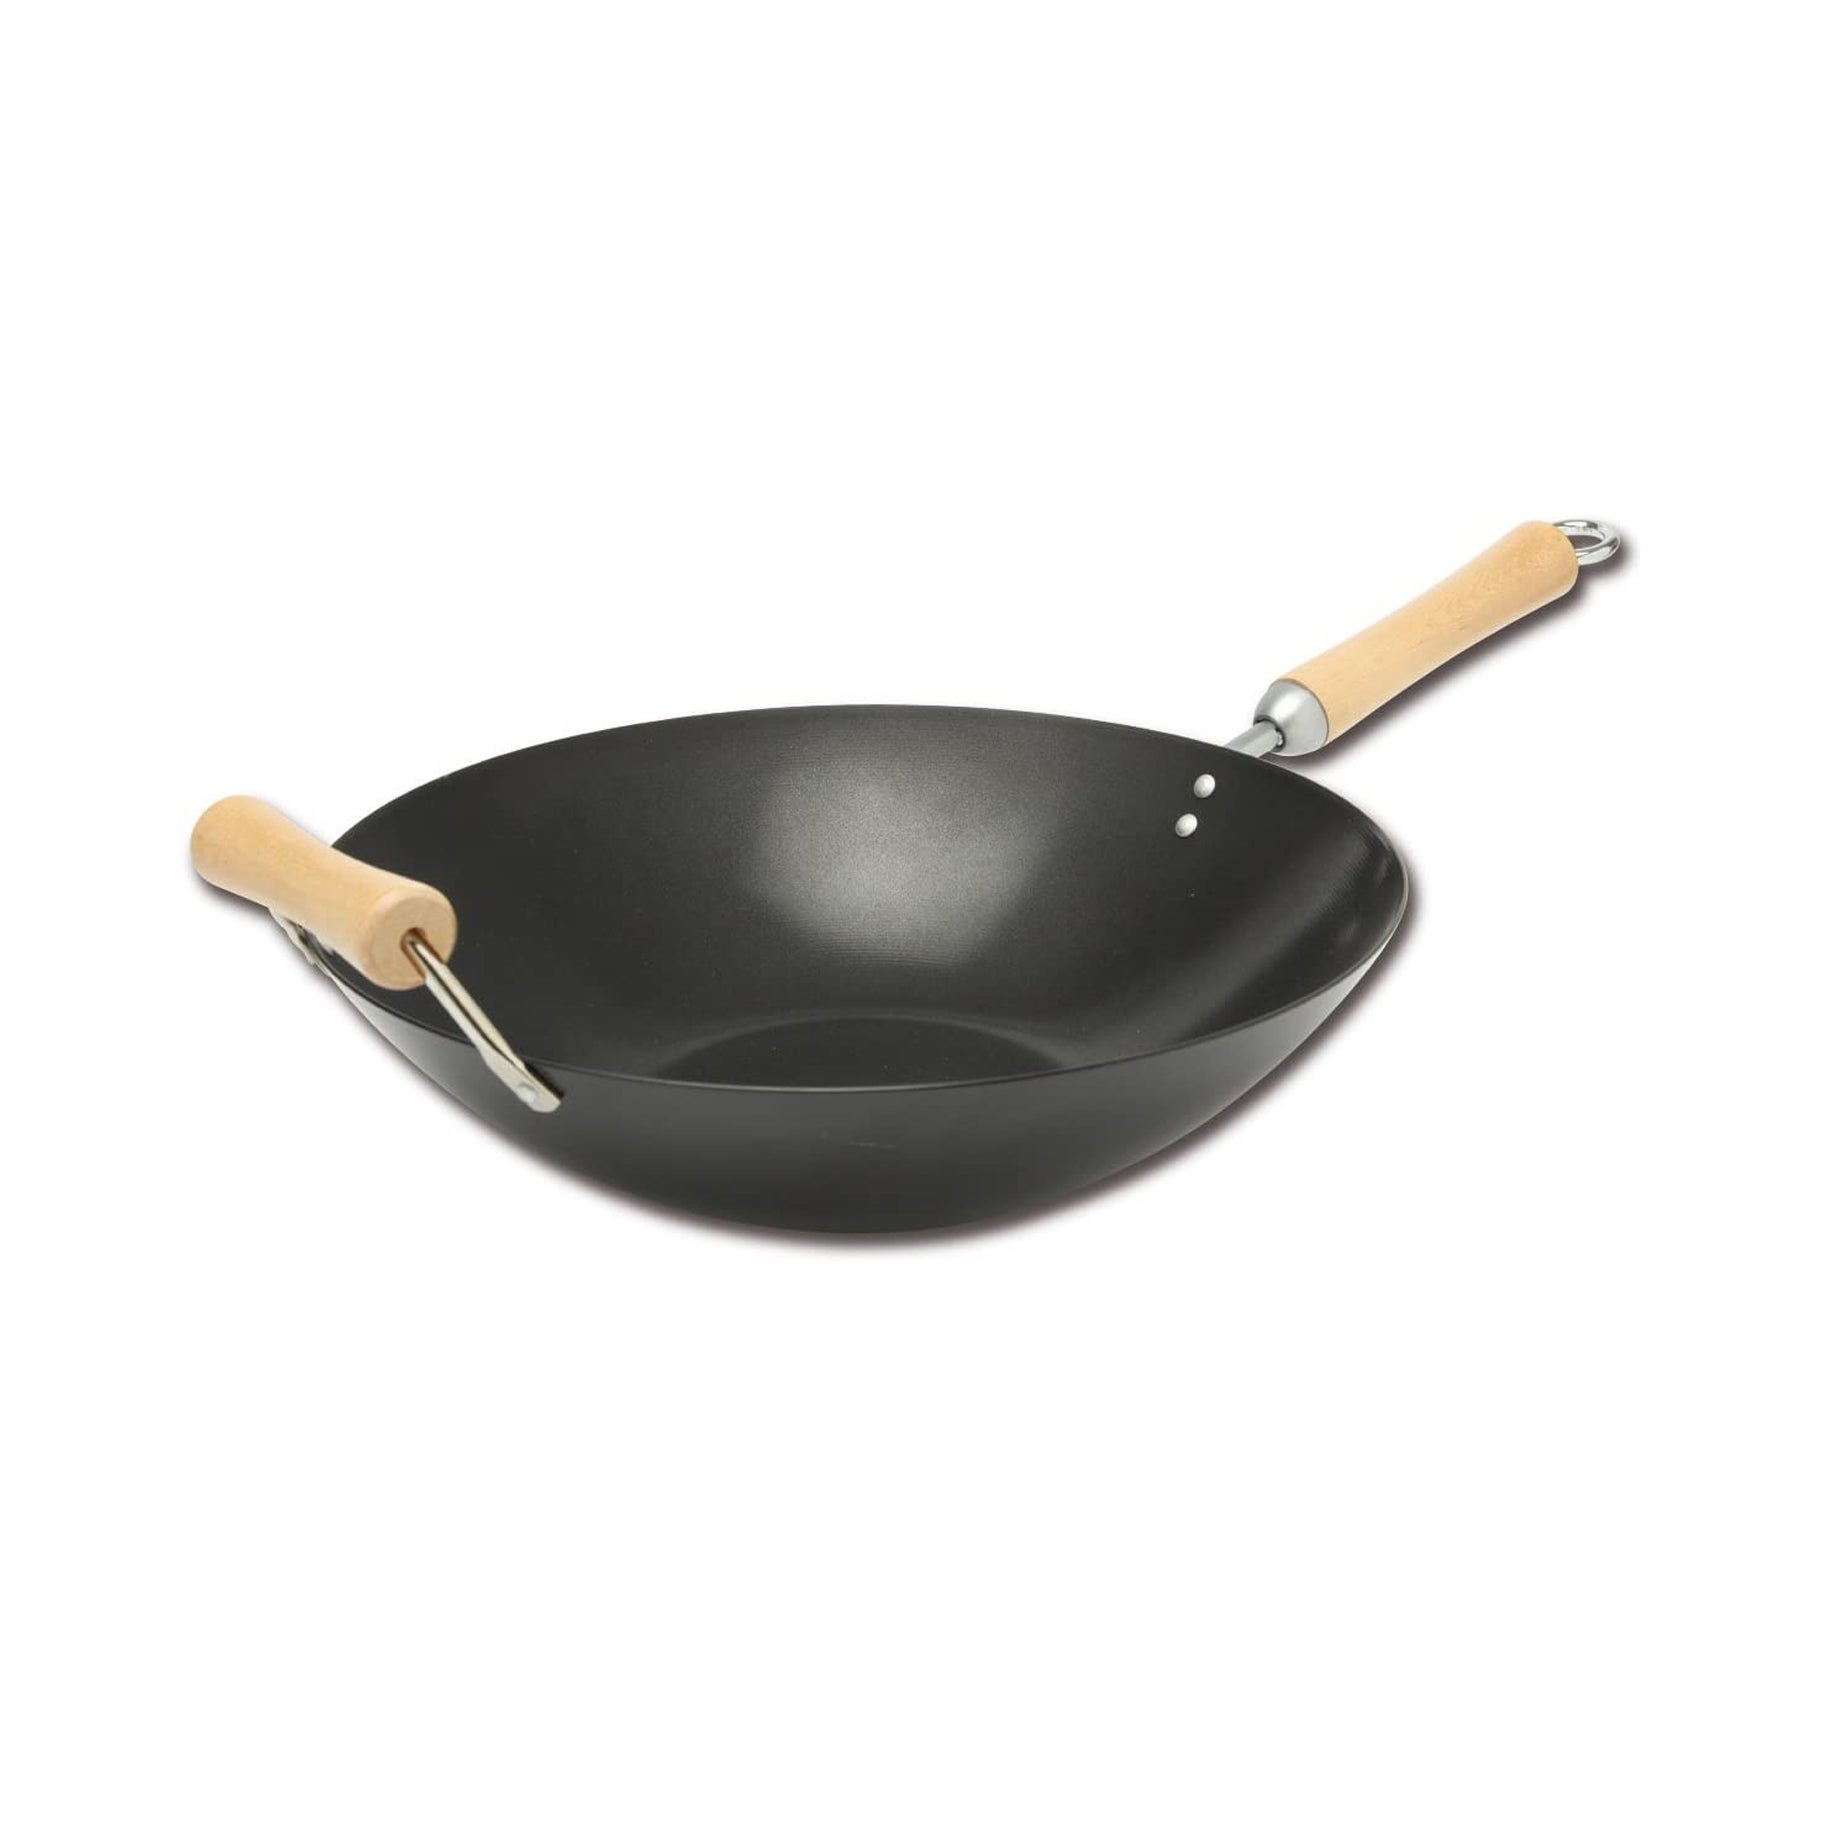 Nationaal volkslied Stad bloem winter How to Choose the Best Woks for Home Kitchens | Saveur